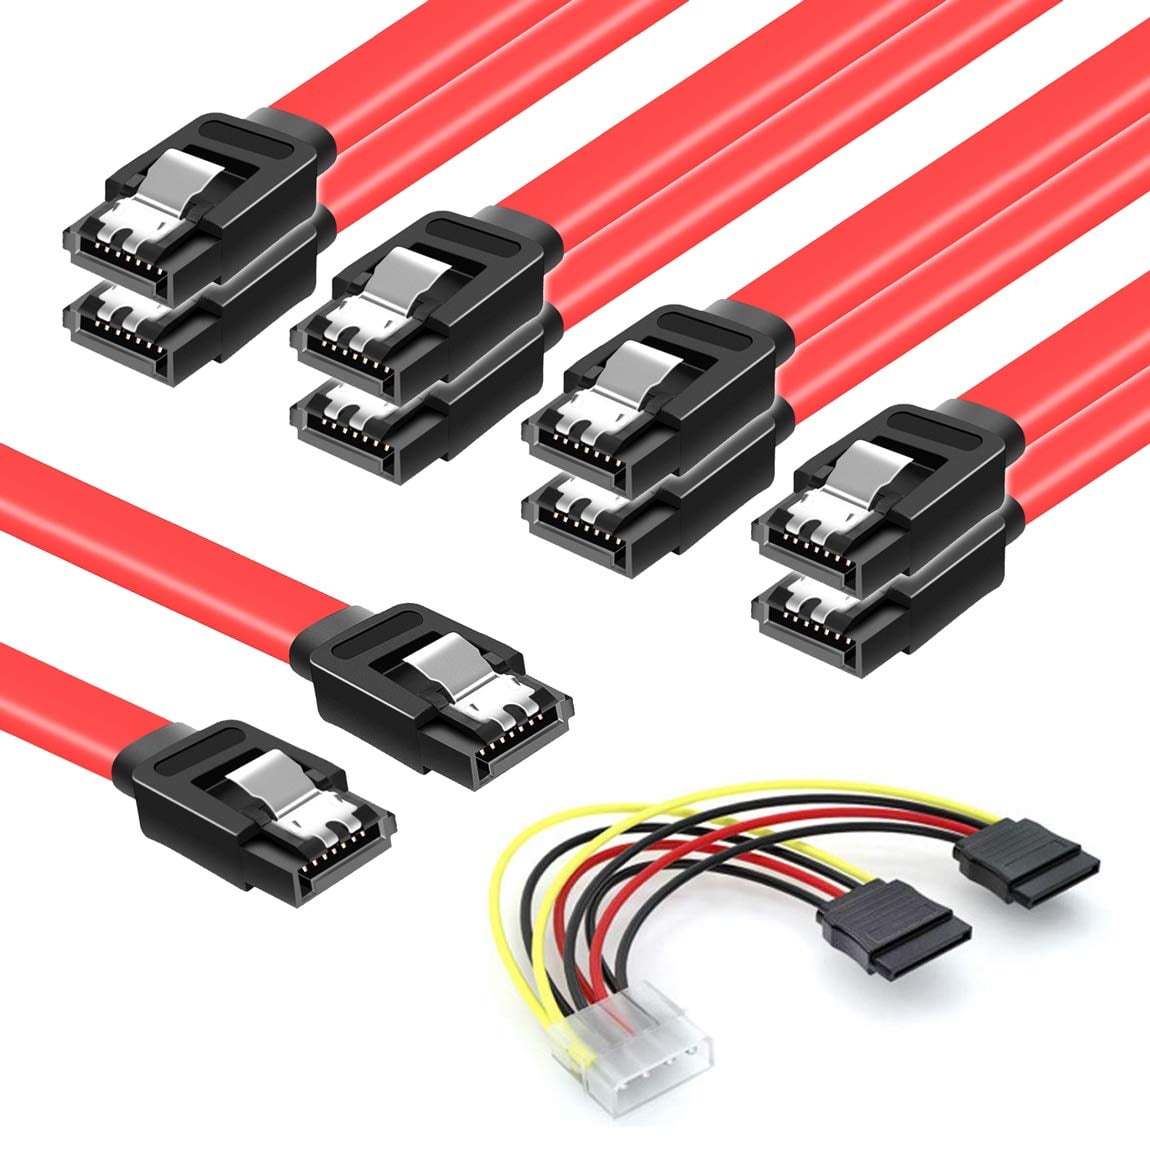 Cables SSD Data Cable 6.0 Gbps and Power Splitter 4 Pin to Dual 15 Hard Drive Compatible - Walmart.com